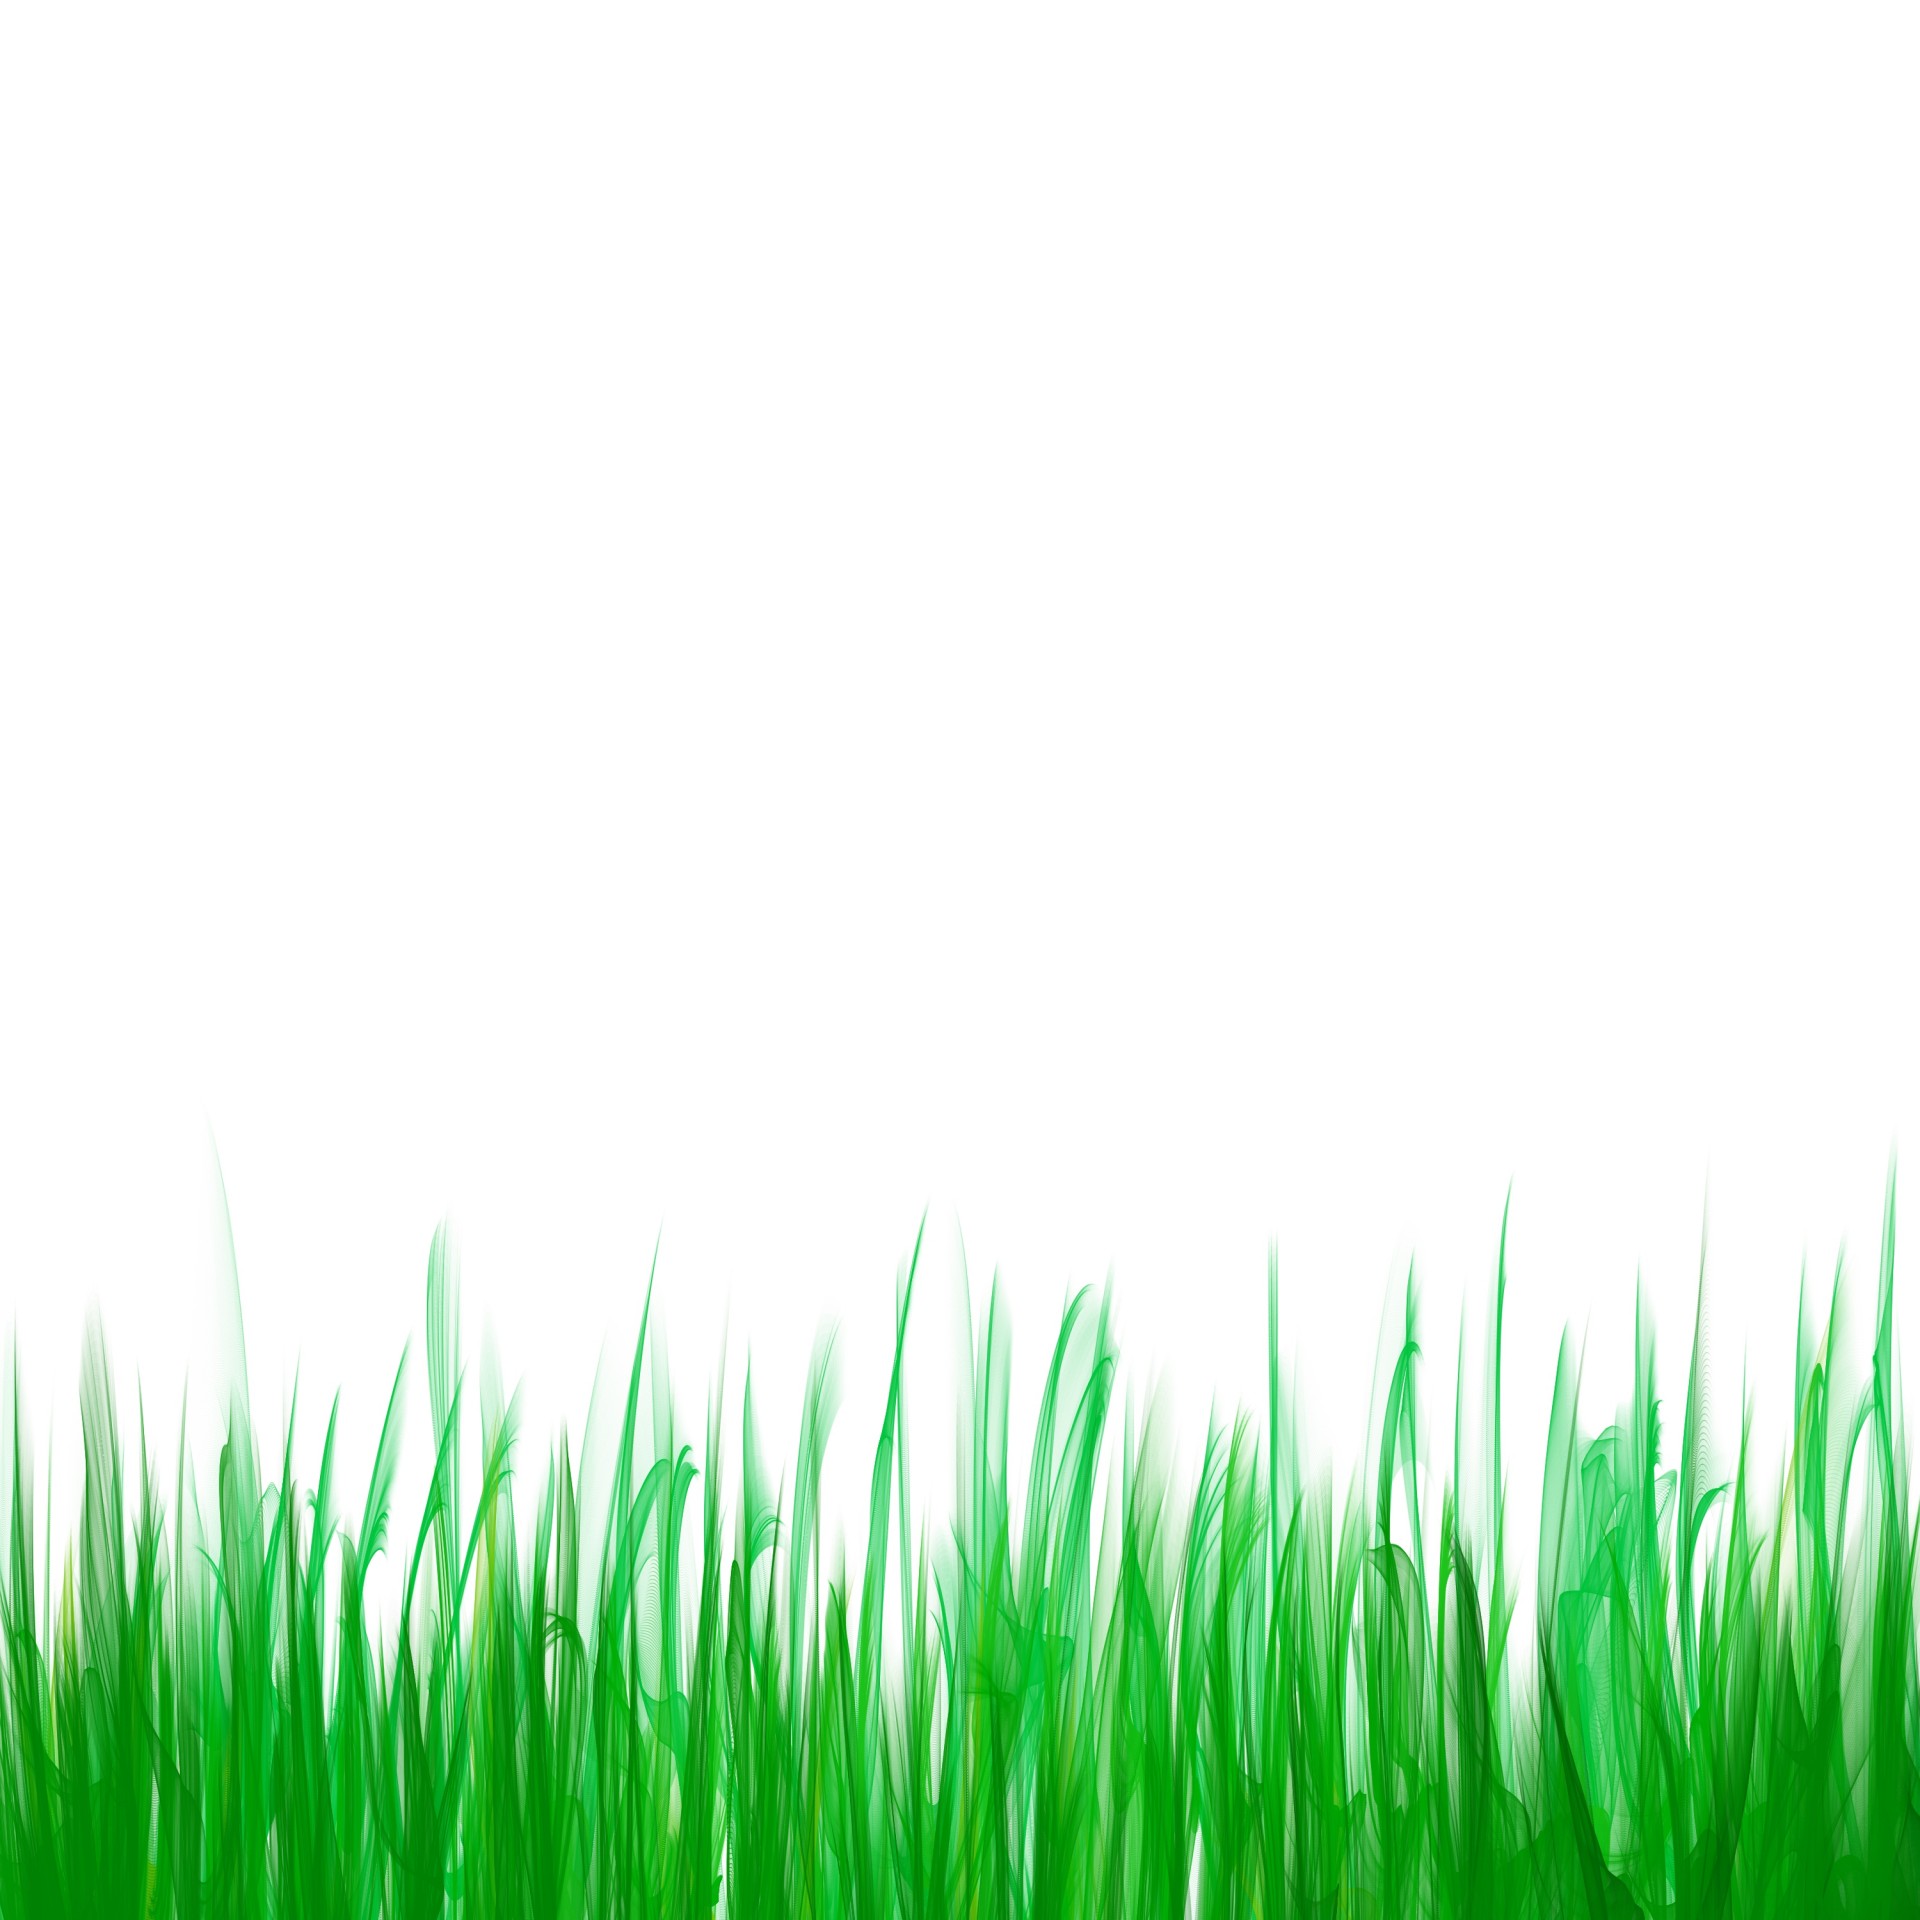 free clipart of green grass - photo #20